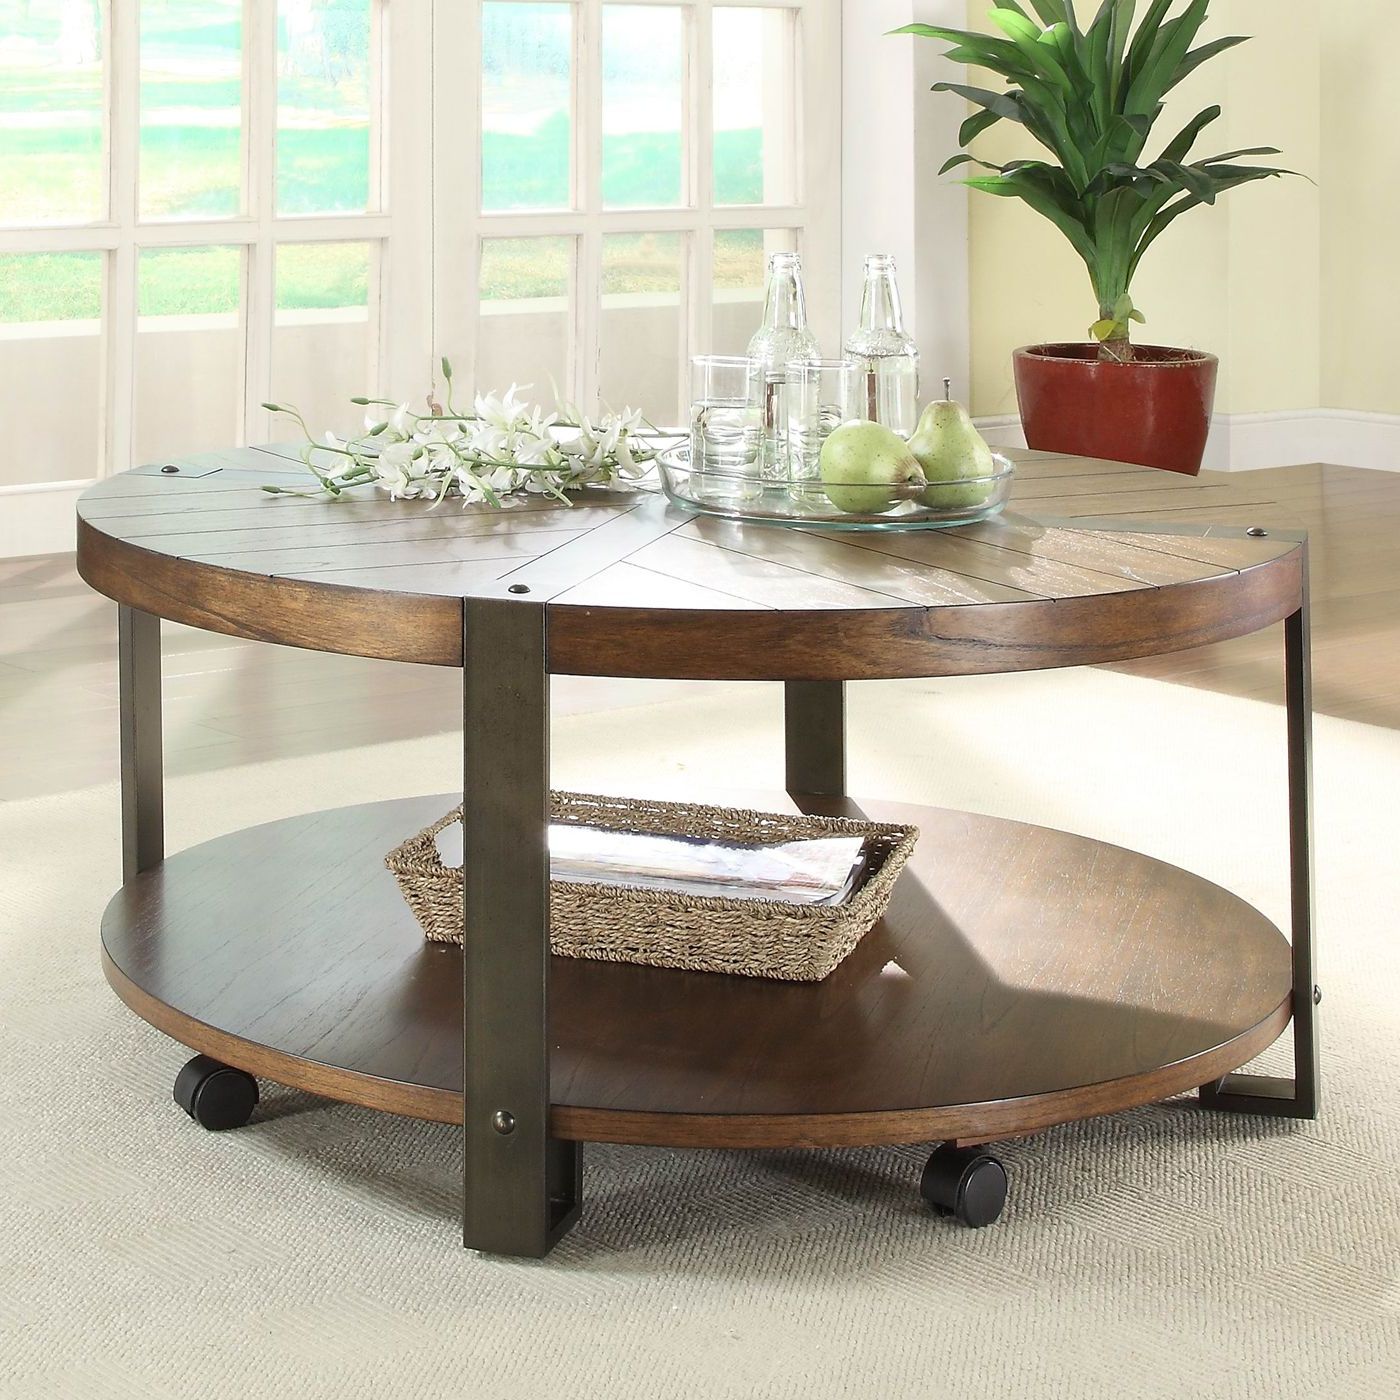 Homelegance 3438 01 Northwood Round Cocktail Table On Casters | Coffee For Coffee Tables With Casters (View 11 of 20)